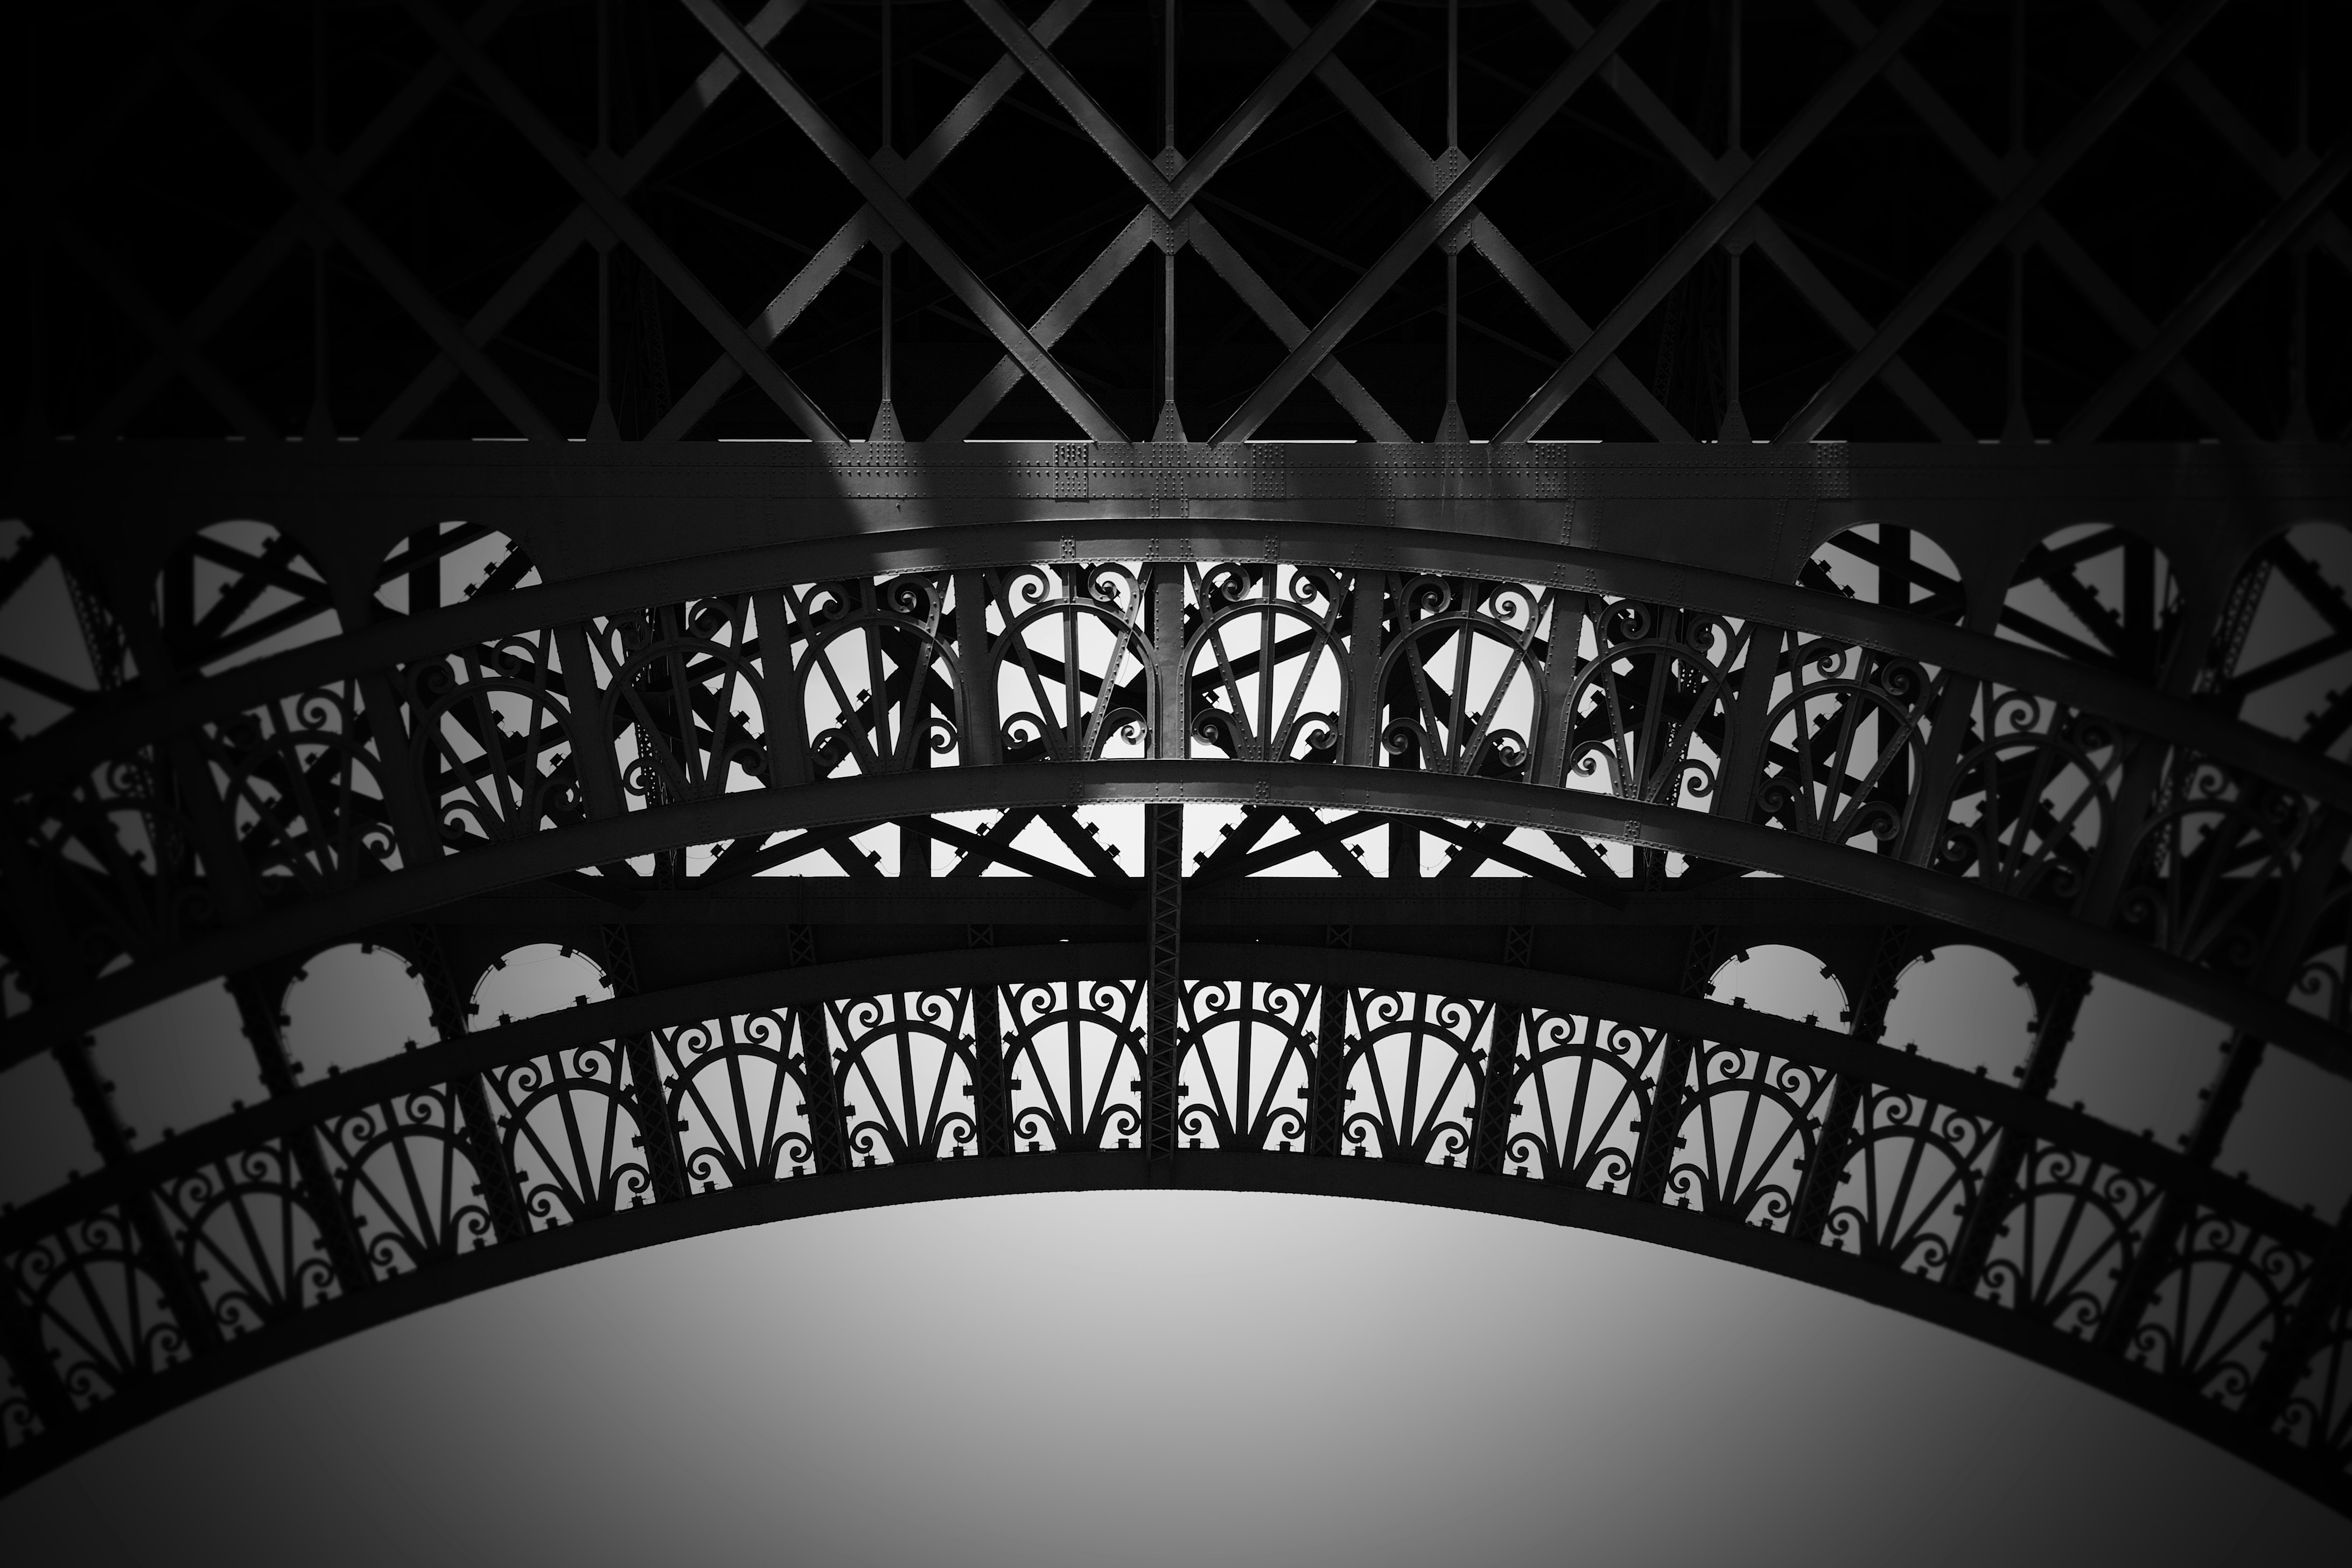 Detail of the Eiffel Tower